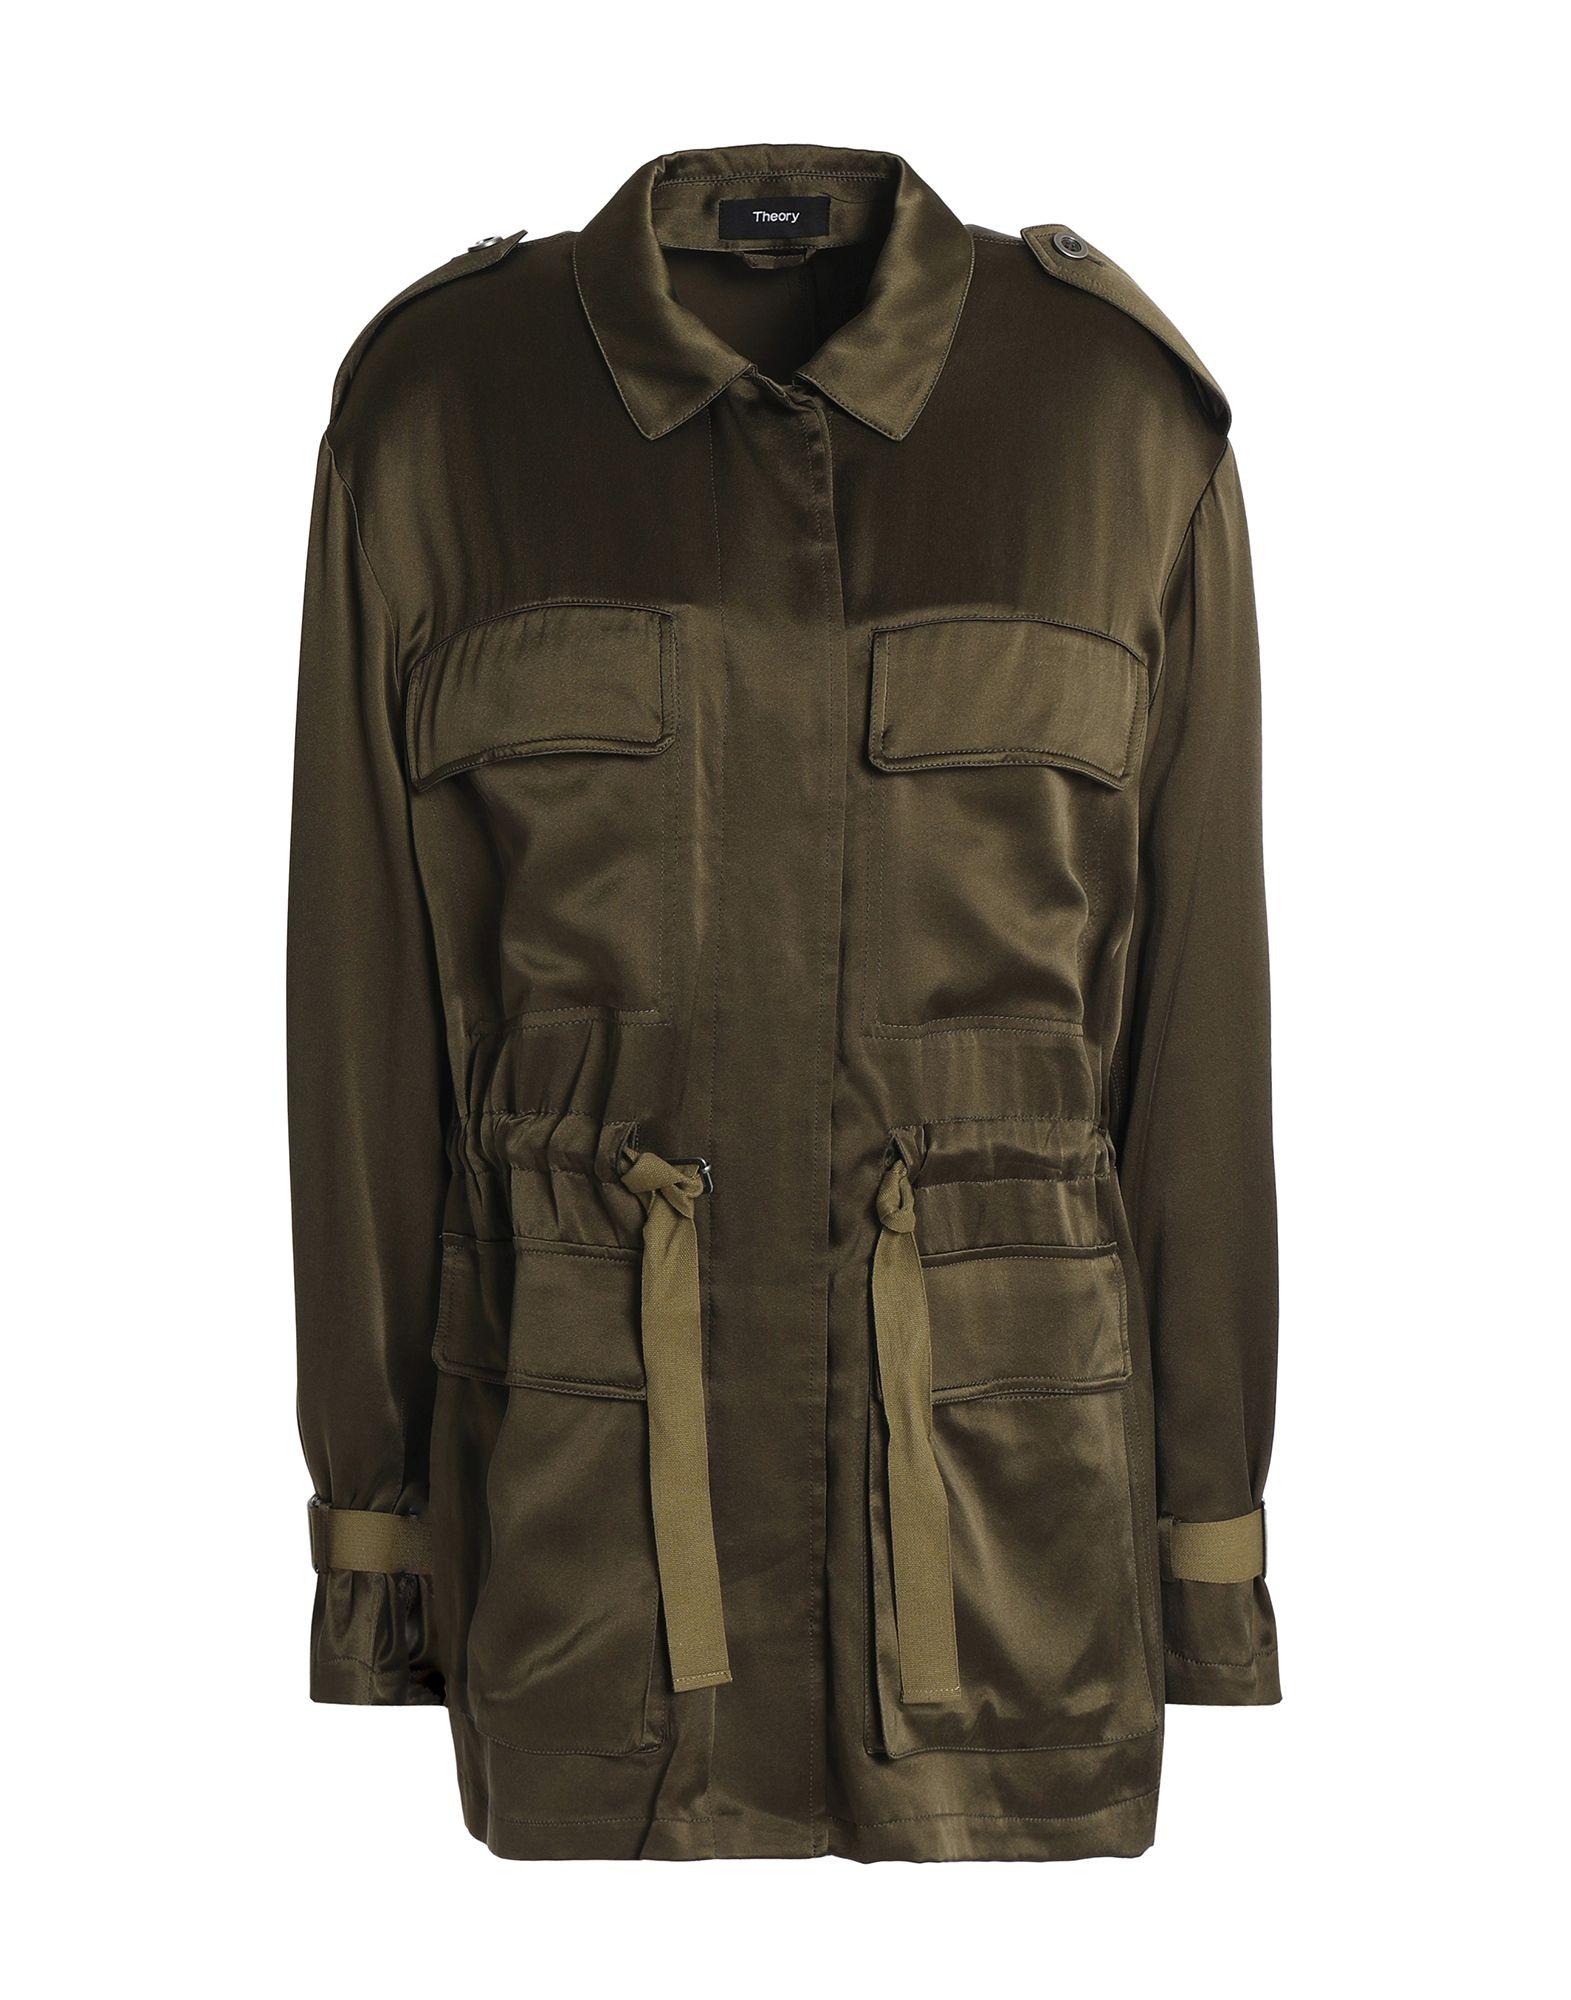 Theory Satin Jacket in Military Green (Green) - Lyst